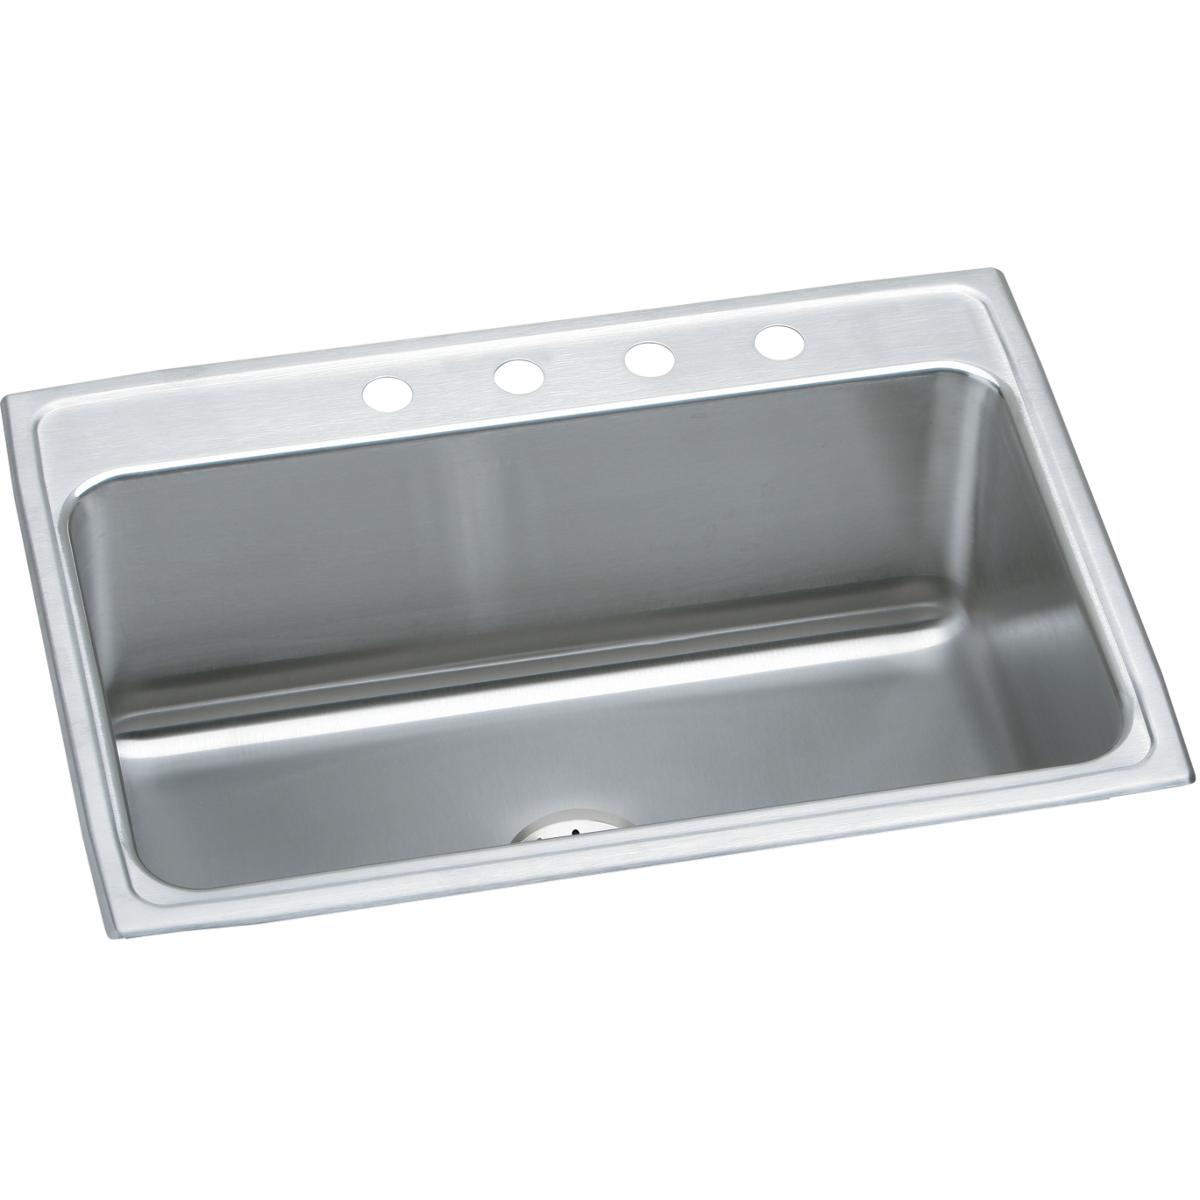 Elkay Lustertone Classic Stainless Steel 31" x 22" x 10-1/8" Single Bowl Drop-in Sink with Perfect Drain